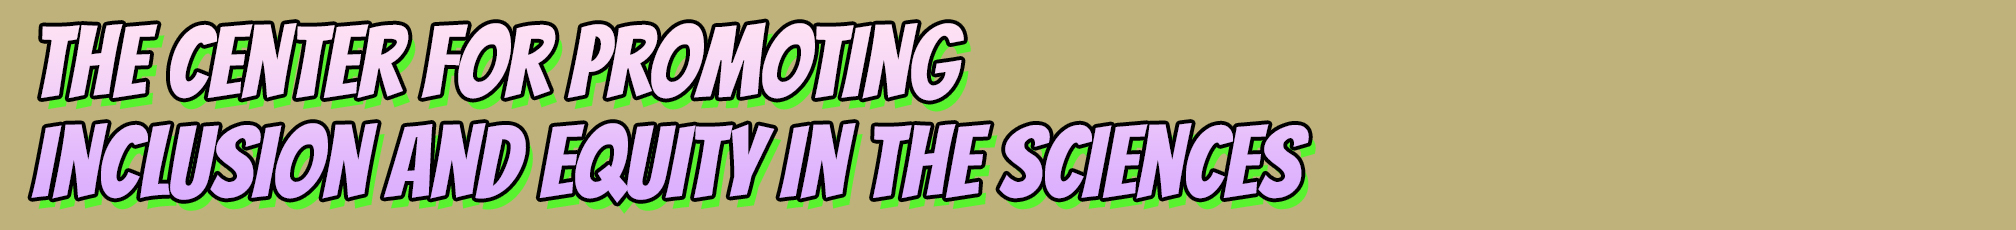 CENTER FOR PROMOTING INCLUSION AND EQUITY IN THE SCIENCES in a comic font with a comic-style skyline graphic.